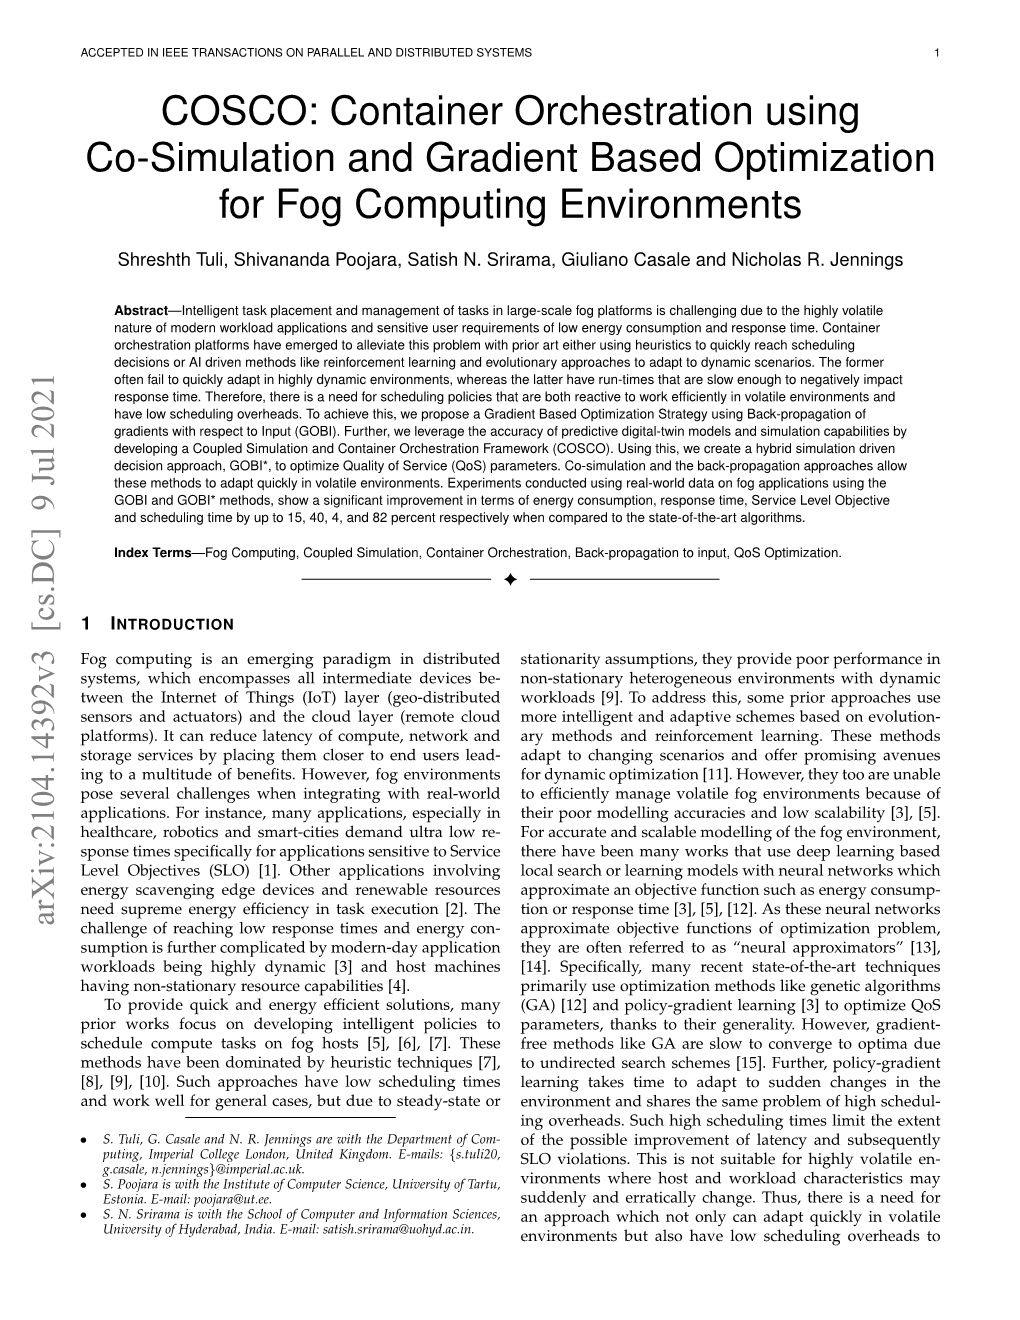 COSCO: Container Orchestration Using Co-Simulation and Gradient Based Optimization for Fog Computing Environments